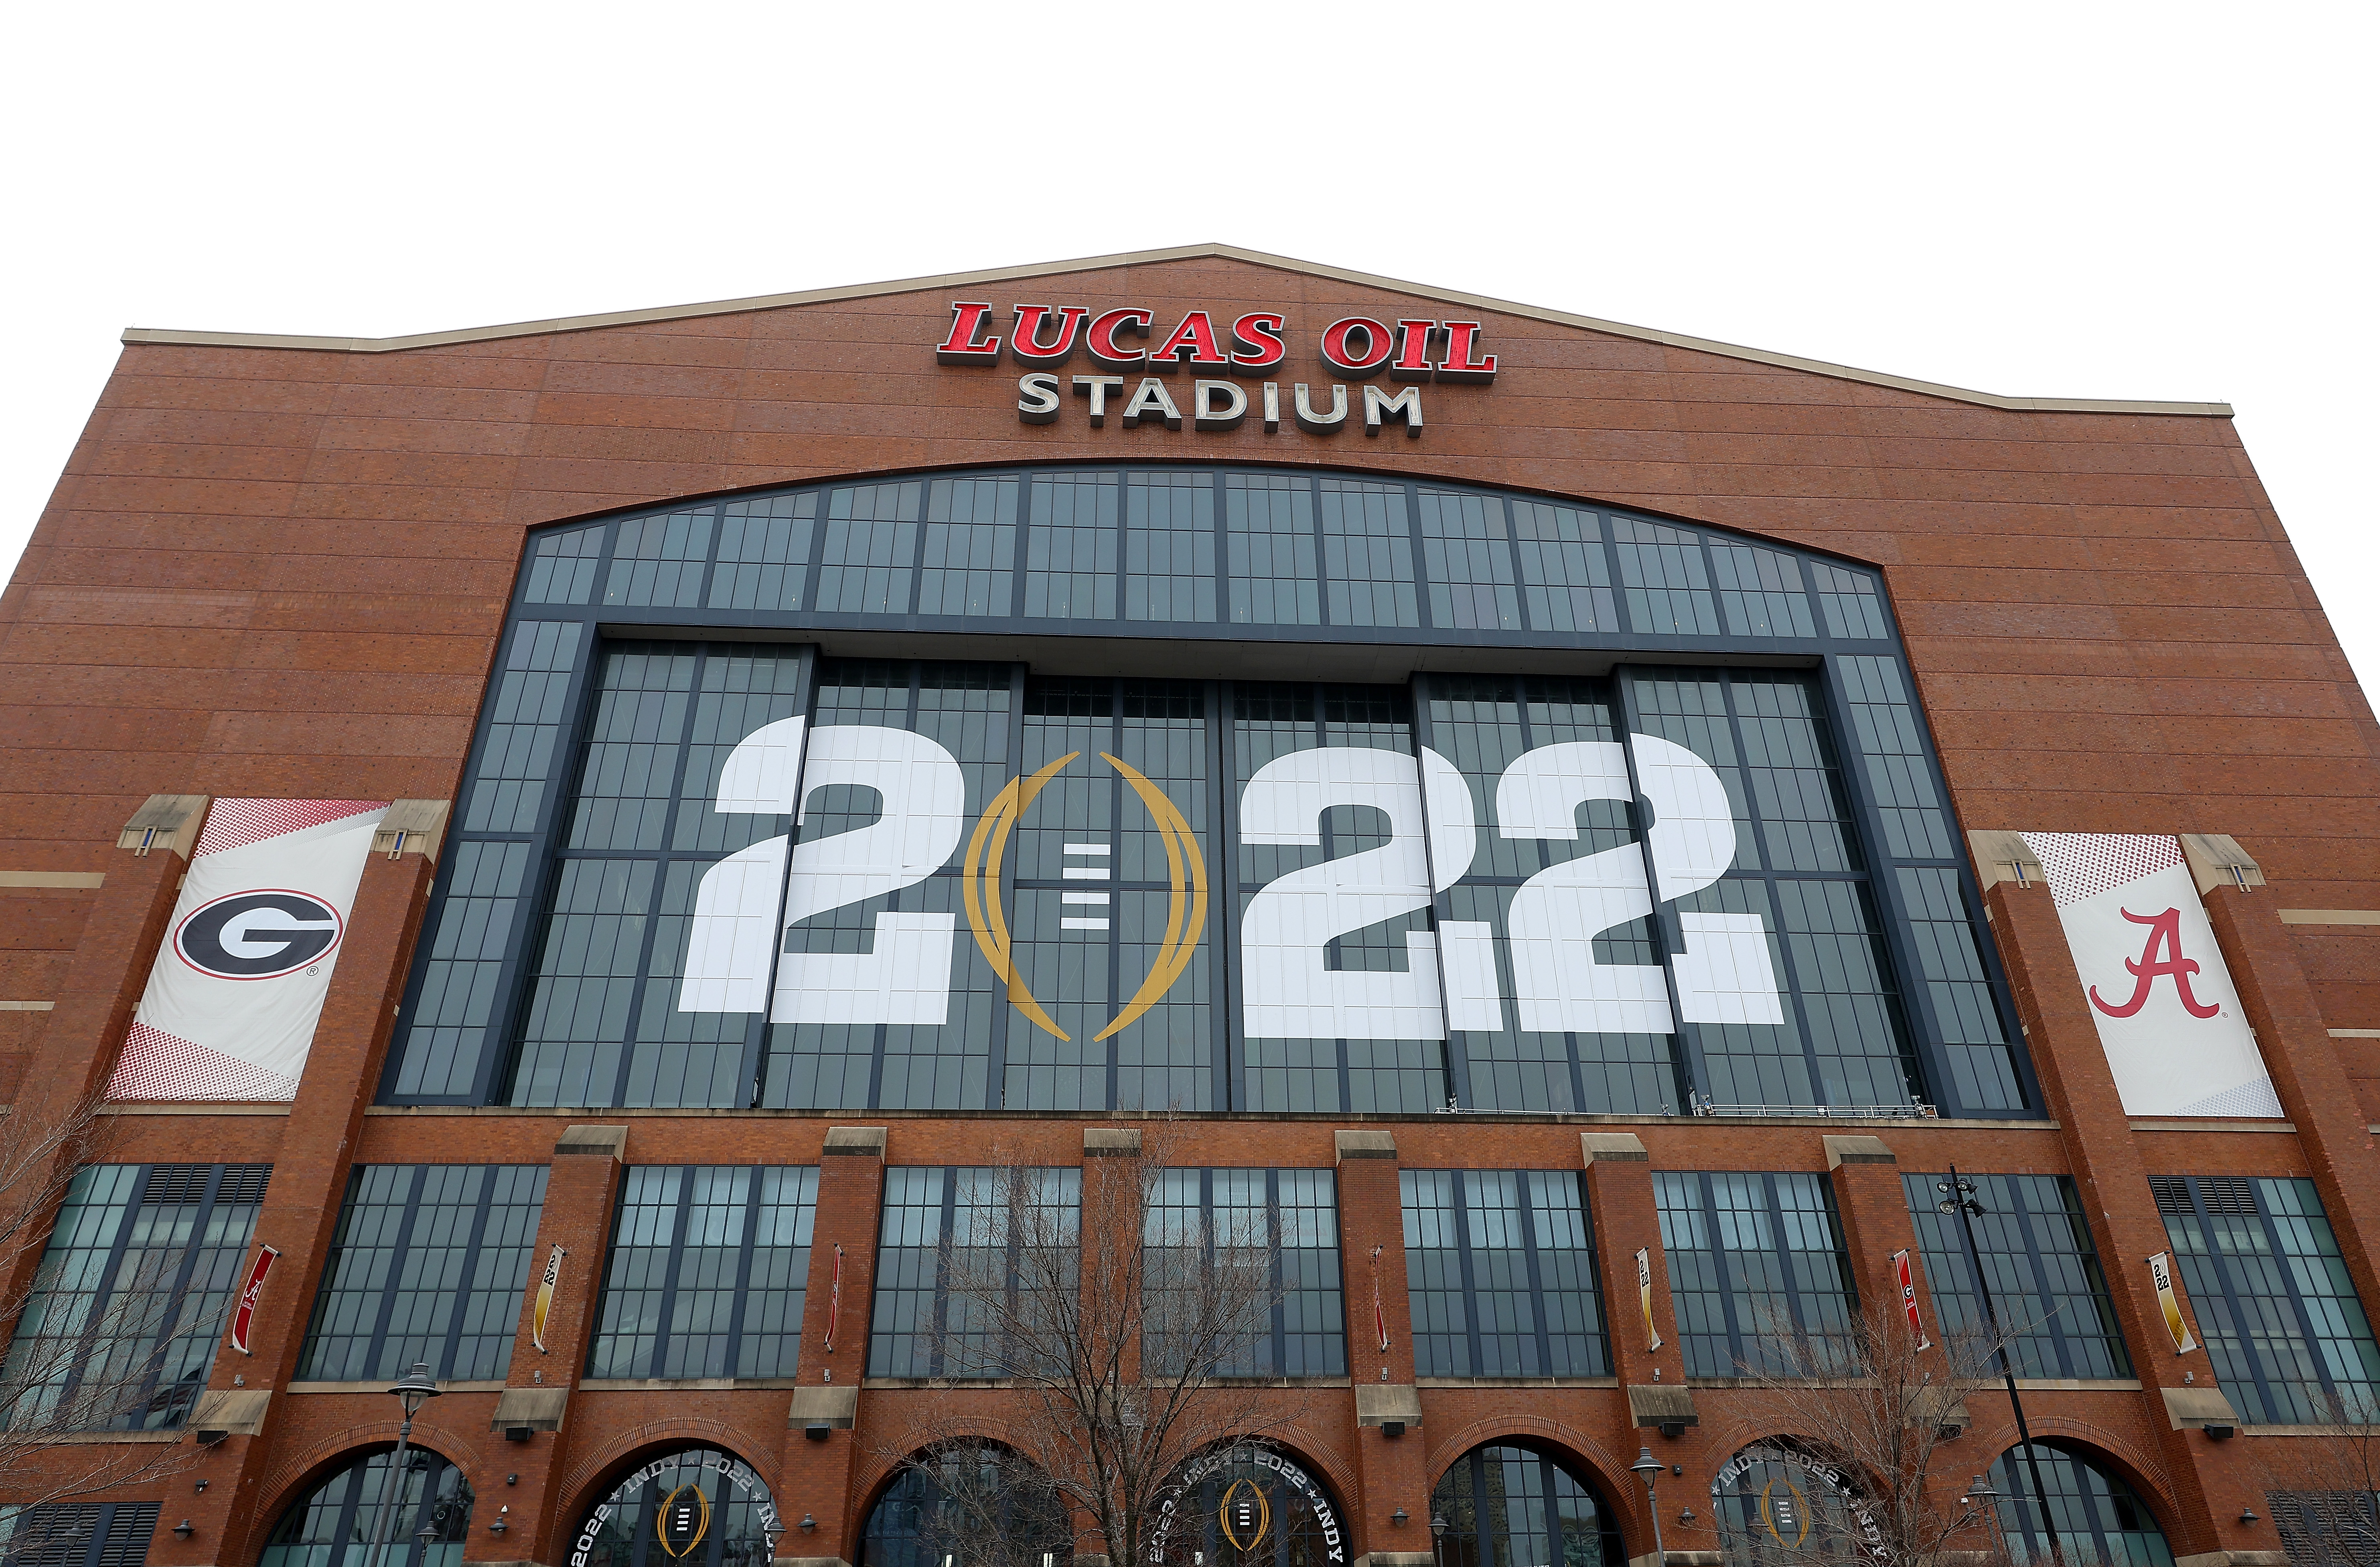 A view of Lucas Oil Stadium ahead of the 2022 CFP National Championship between the Alabama Crimson Tide and the Georgia Bulldogs on January 09, 2022 in Indianapolis, Indiana.